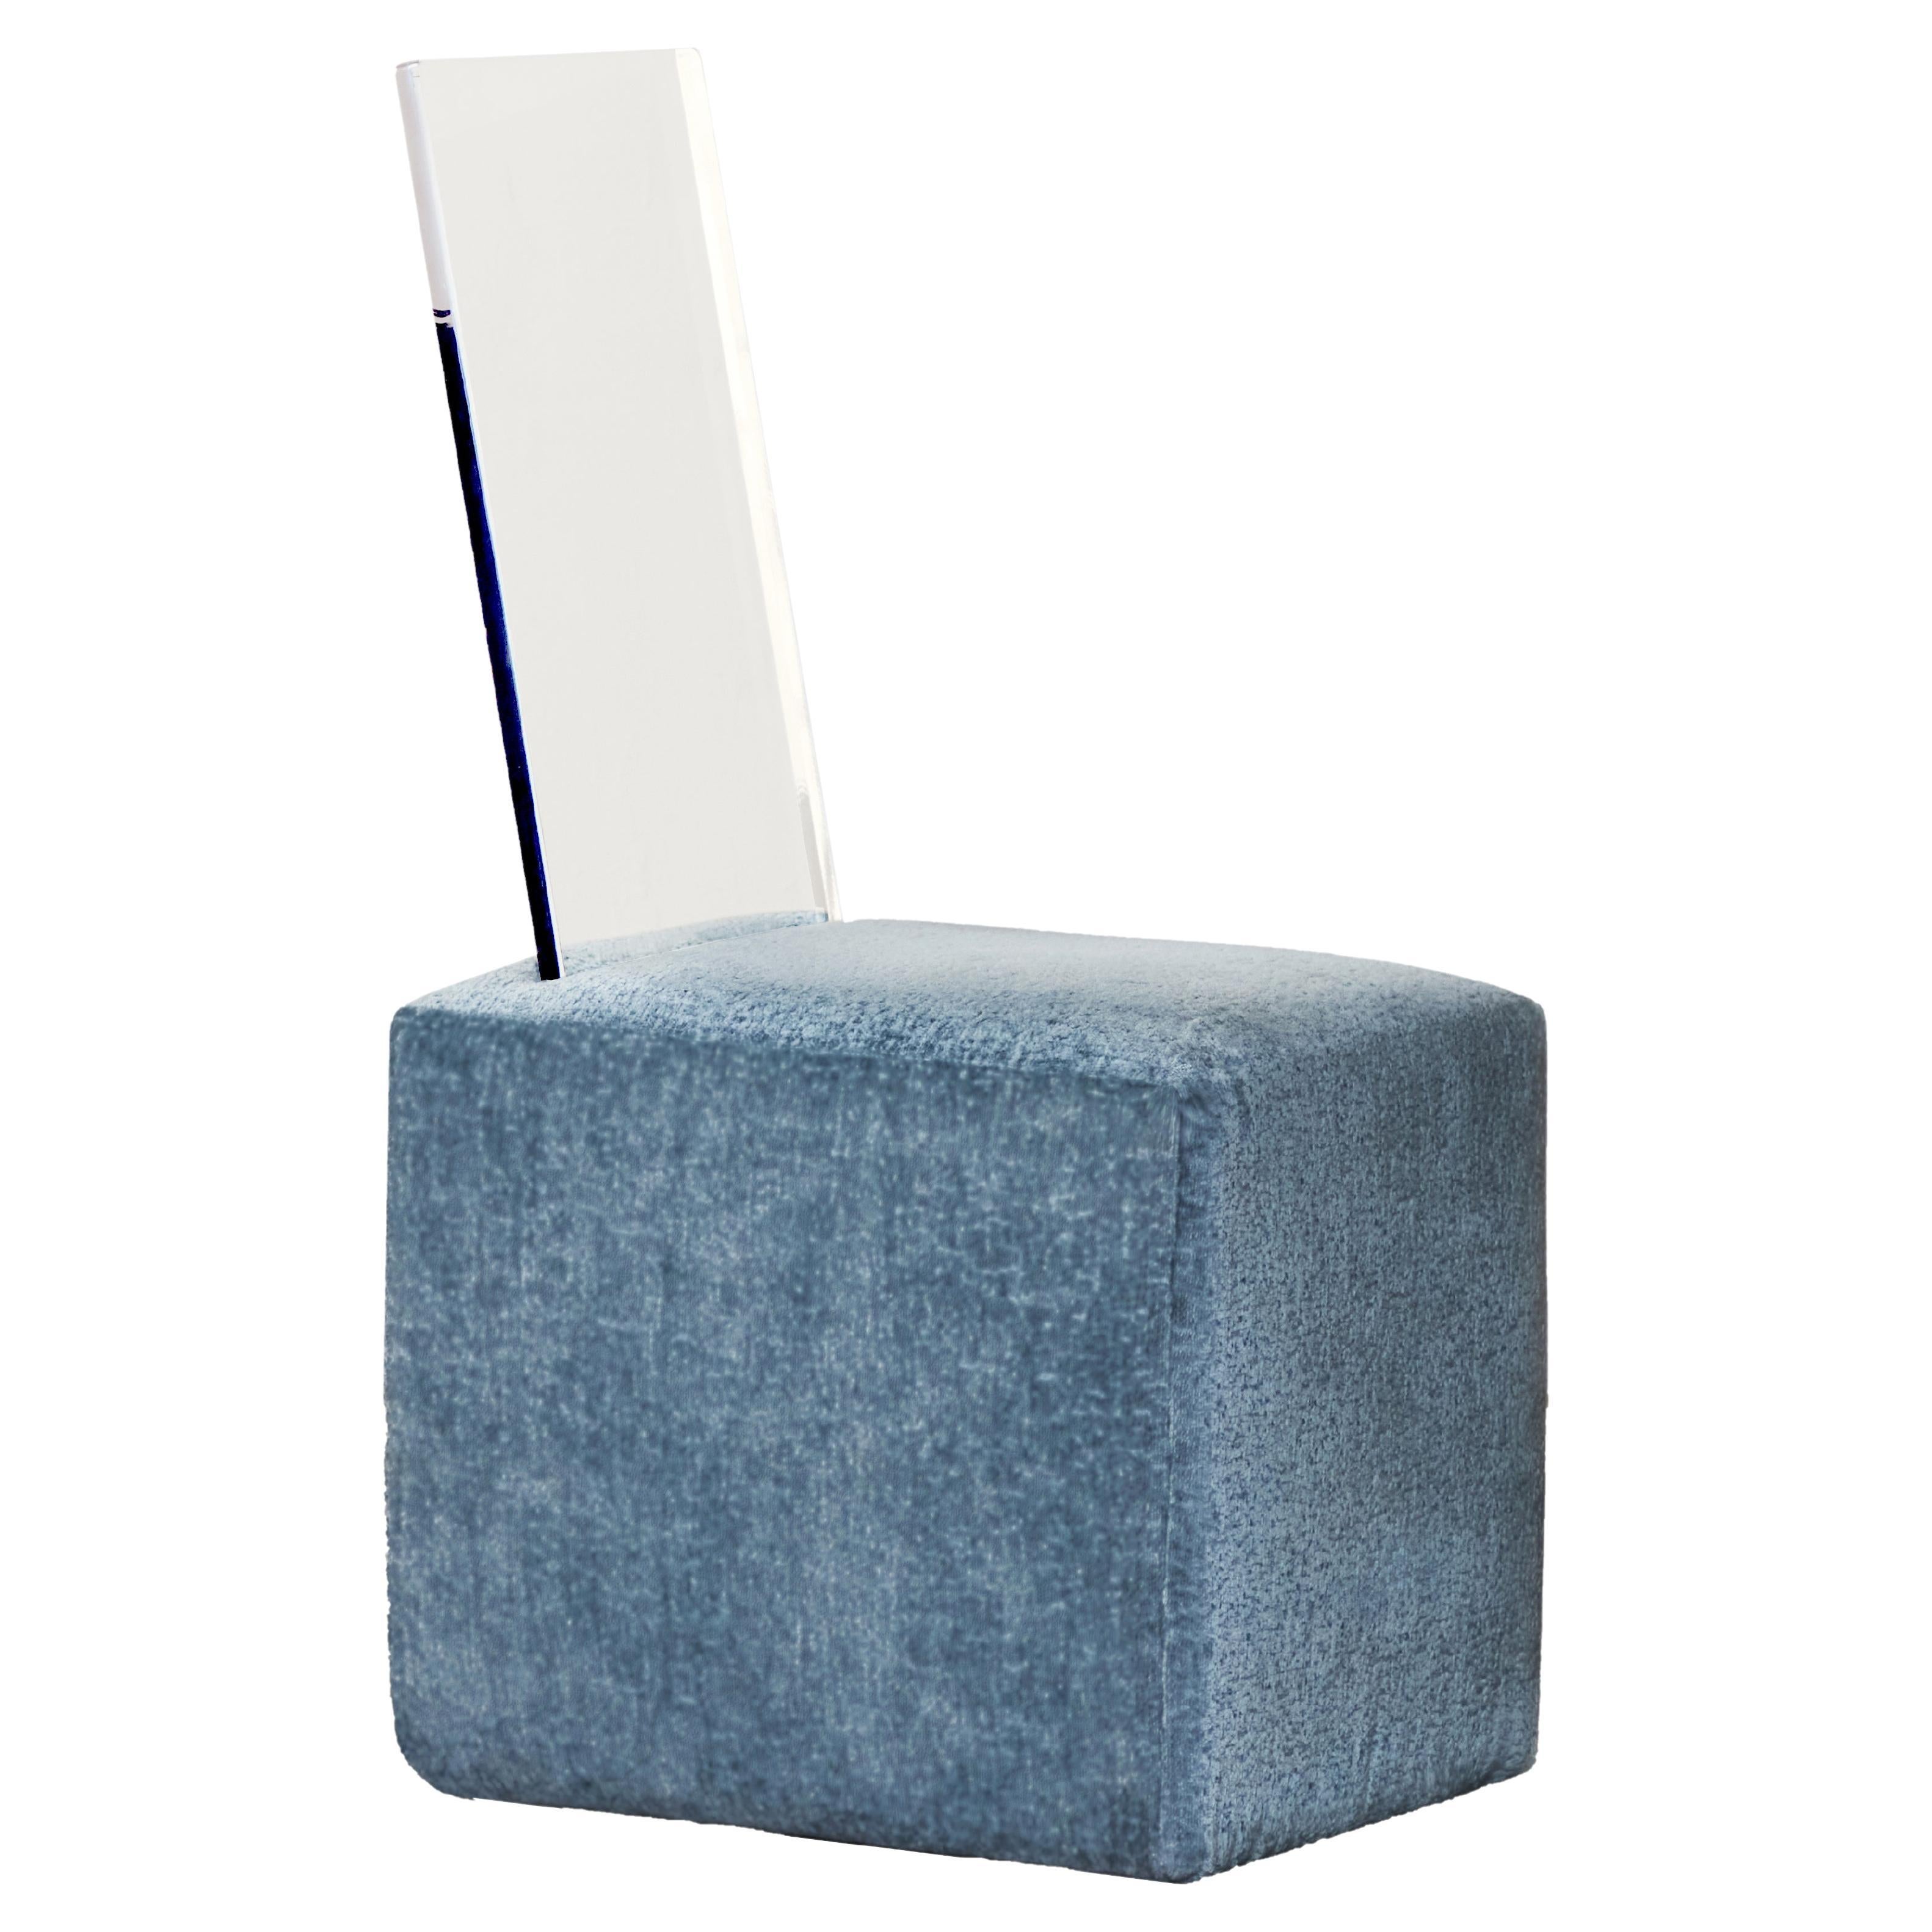 BLOC Cube Sky Blue Textured Upholstered Lucite Chair by Caroline Chao